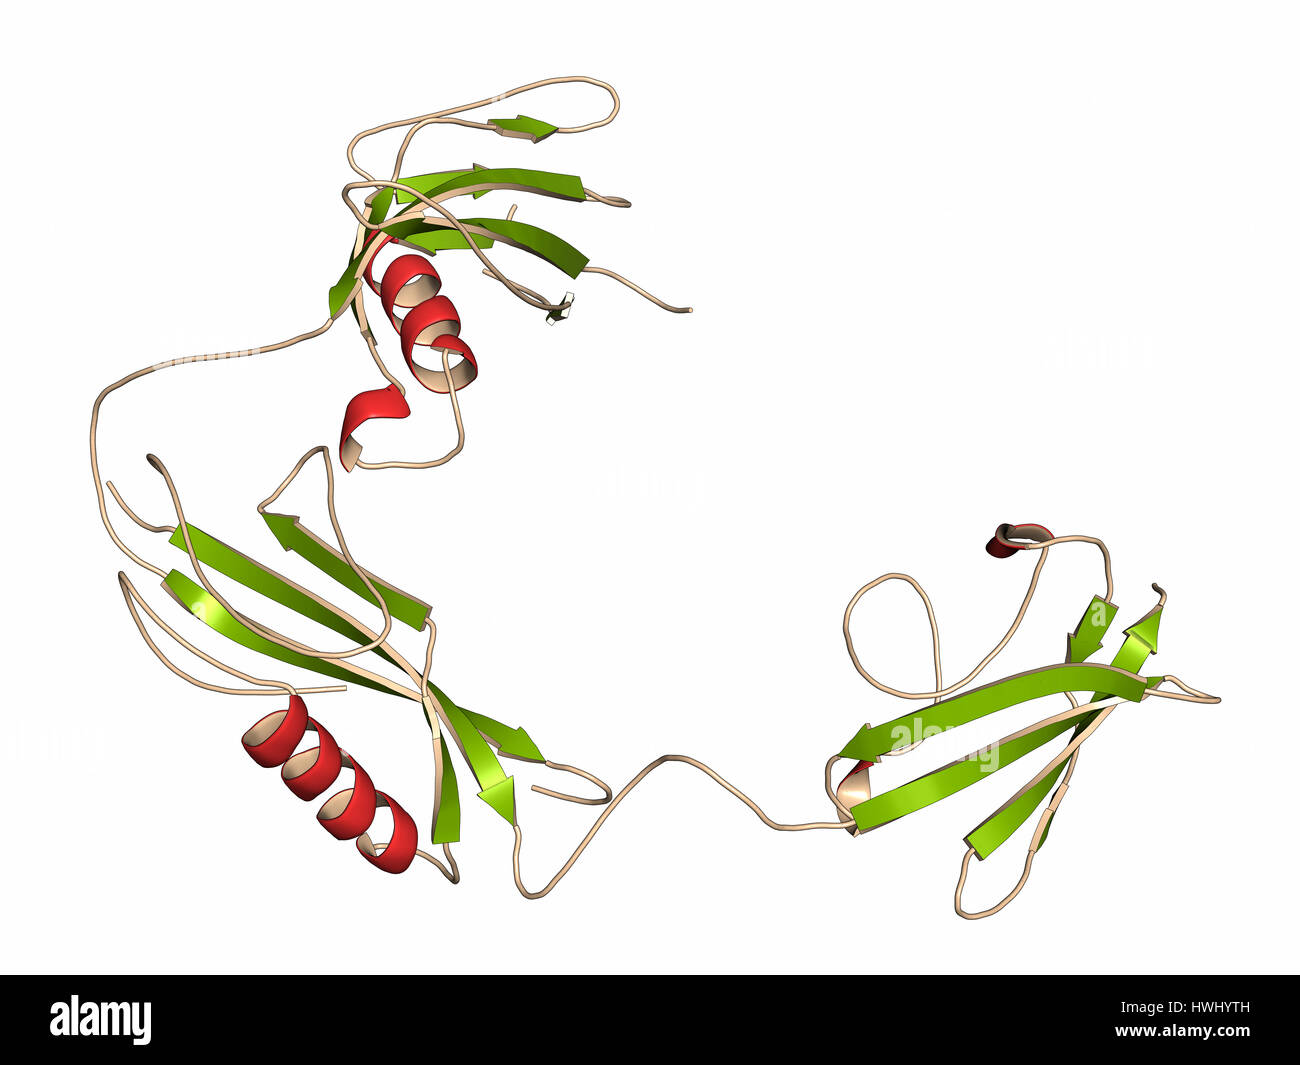 Streptokinase enzyme molecule. Protein from Streptococcus bacteria that is used as a thrombolytic drug. Cartoon representation with secondary structur Stock Photo